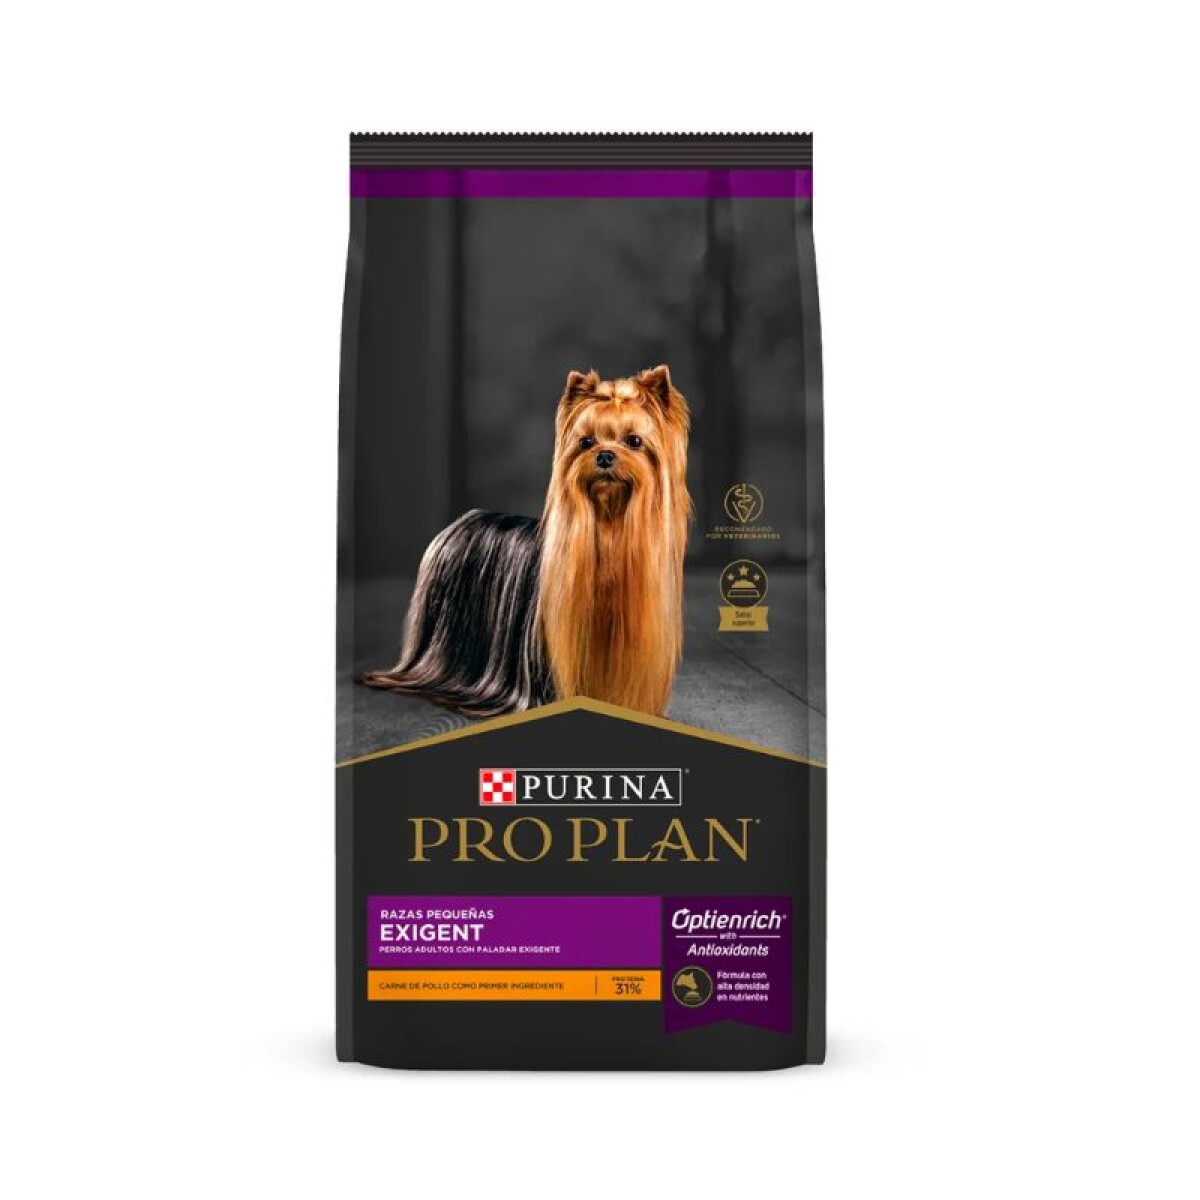 PROPLAN EXIGENT DOG SMALL BREED 7,5 KG - Proplan Exigent Dog Small Breed 7,5 Kg 